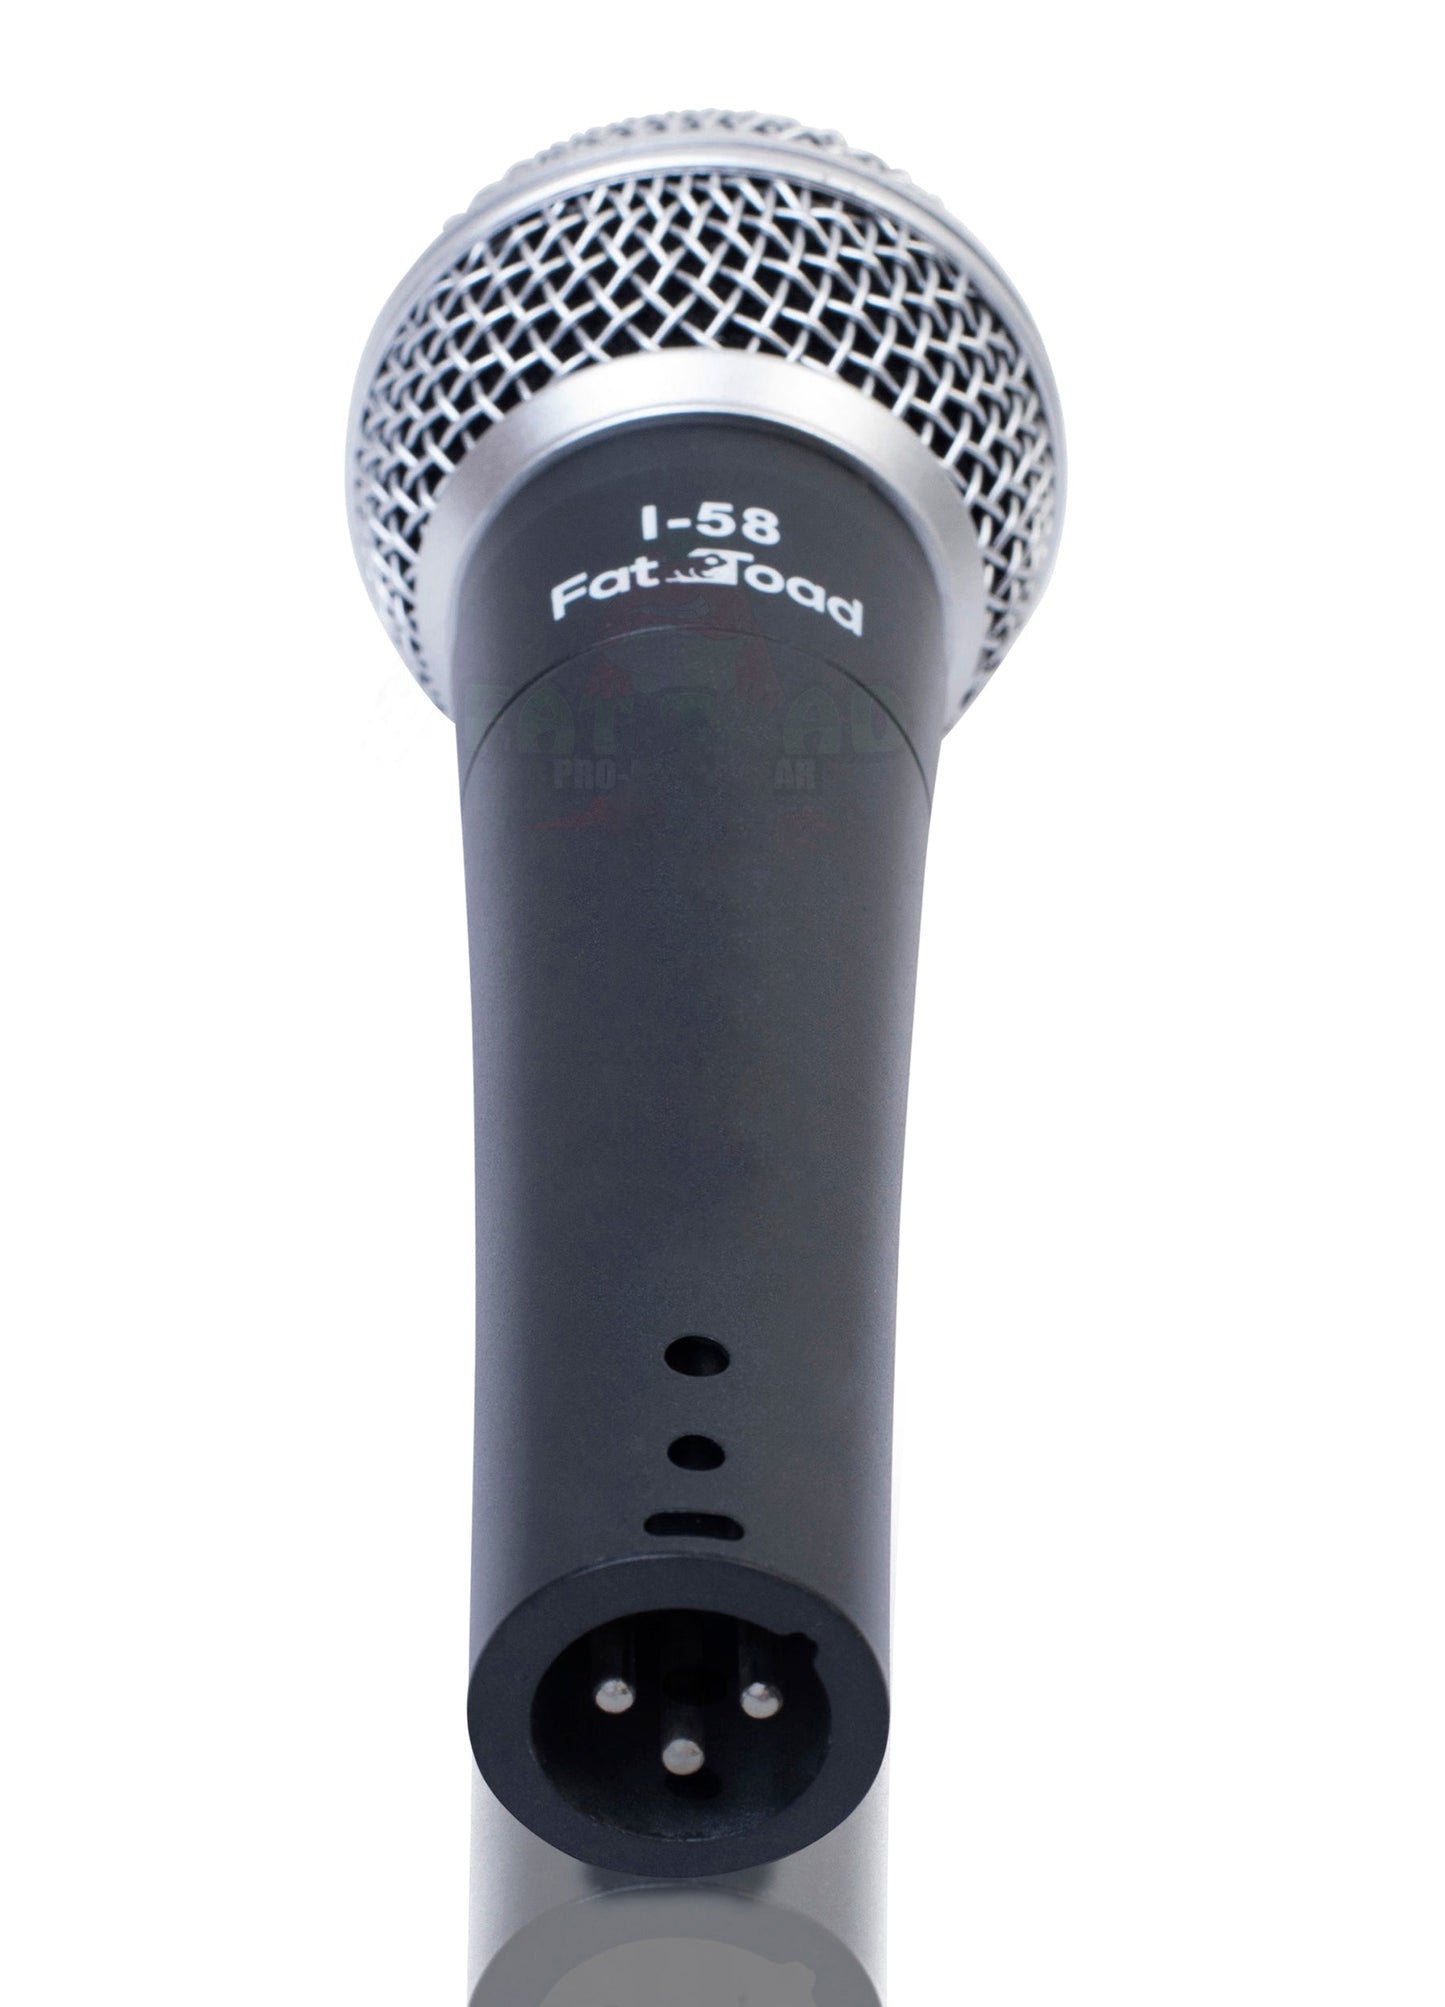 Cardioid Vocal Microphones with XLR Mic Cables & Clips (6 Pack) by FAT TOAD - Dynamic Handheld, Unidirectional for Studio Recording, Live Stage